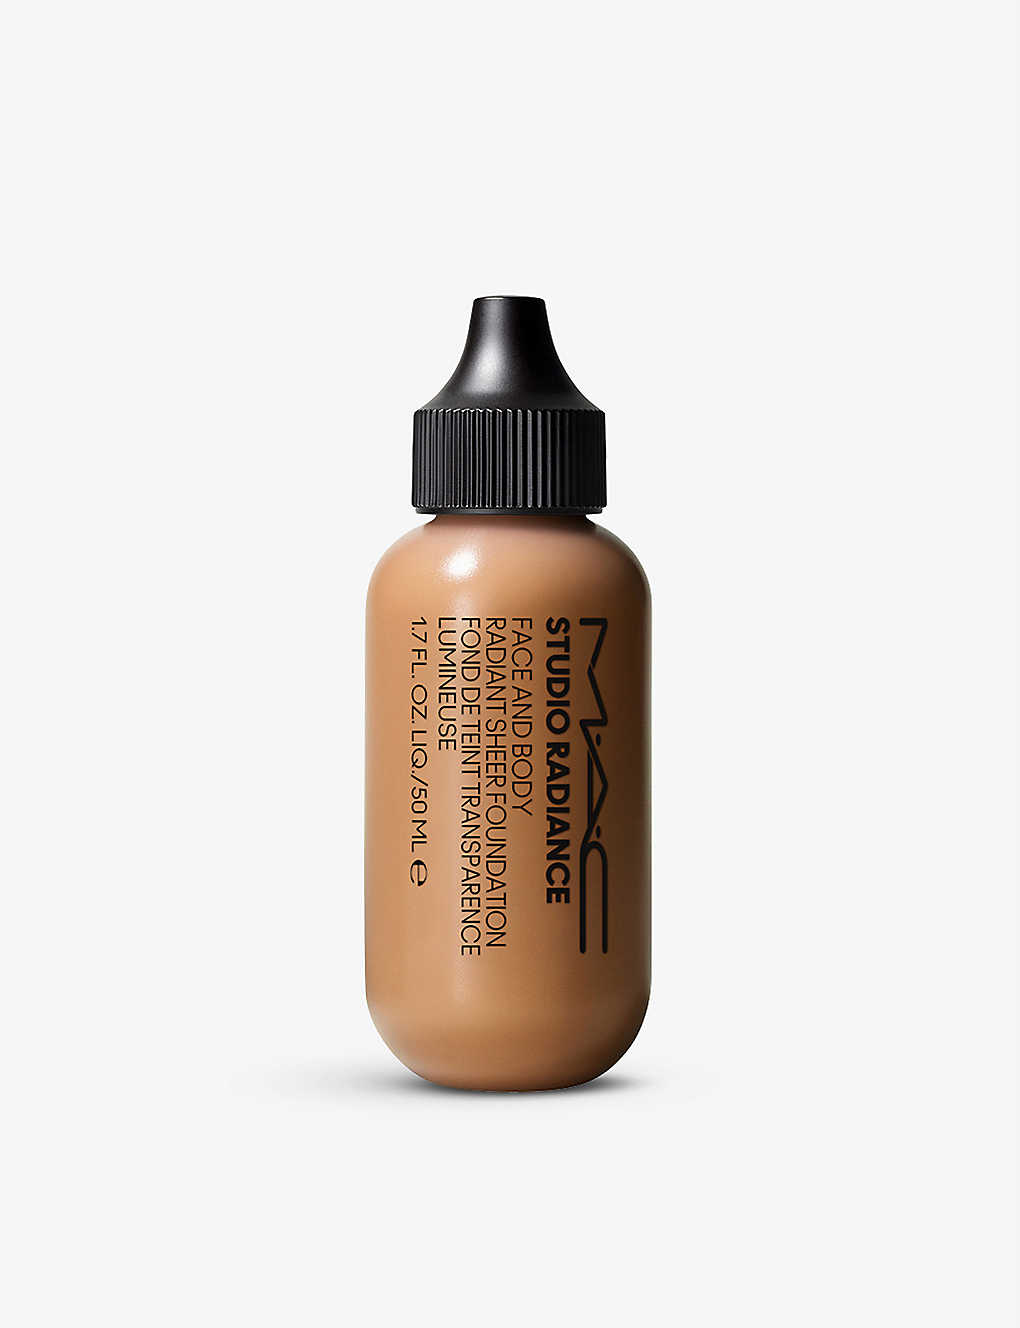 Mac Studio Radiance Face And Body Radiant Sheer Foundation 50ml In C5